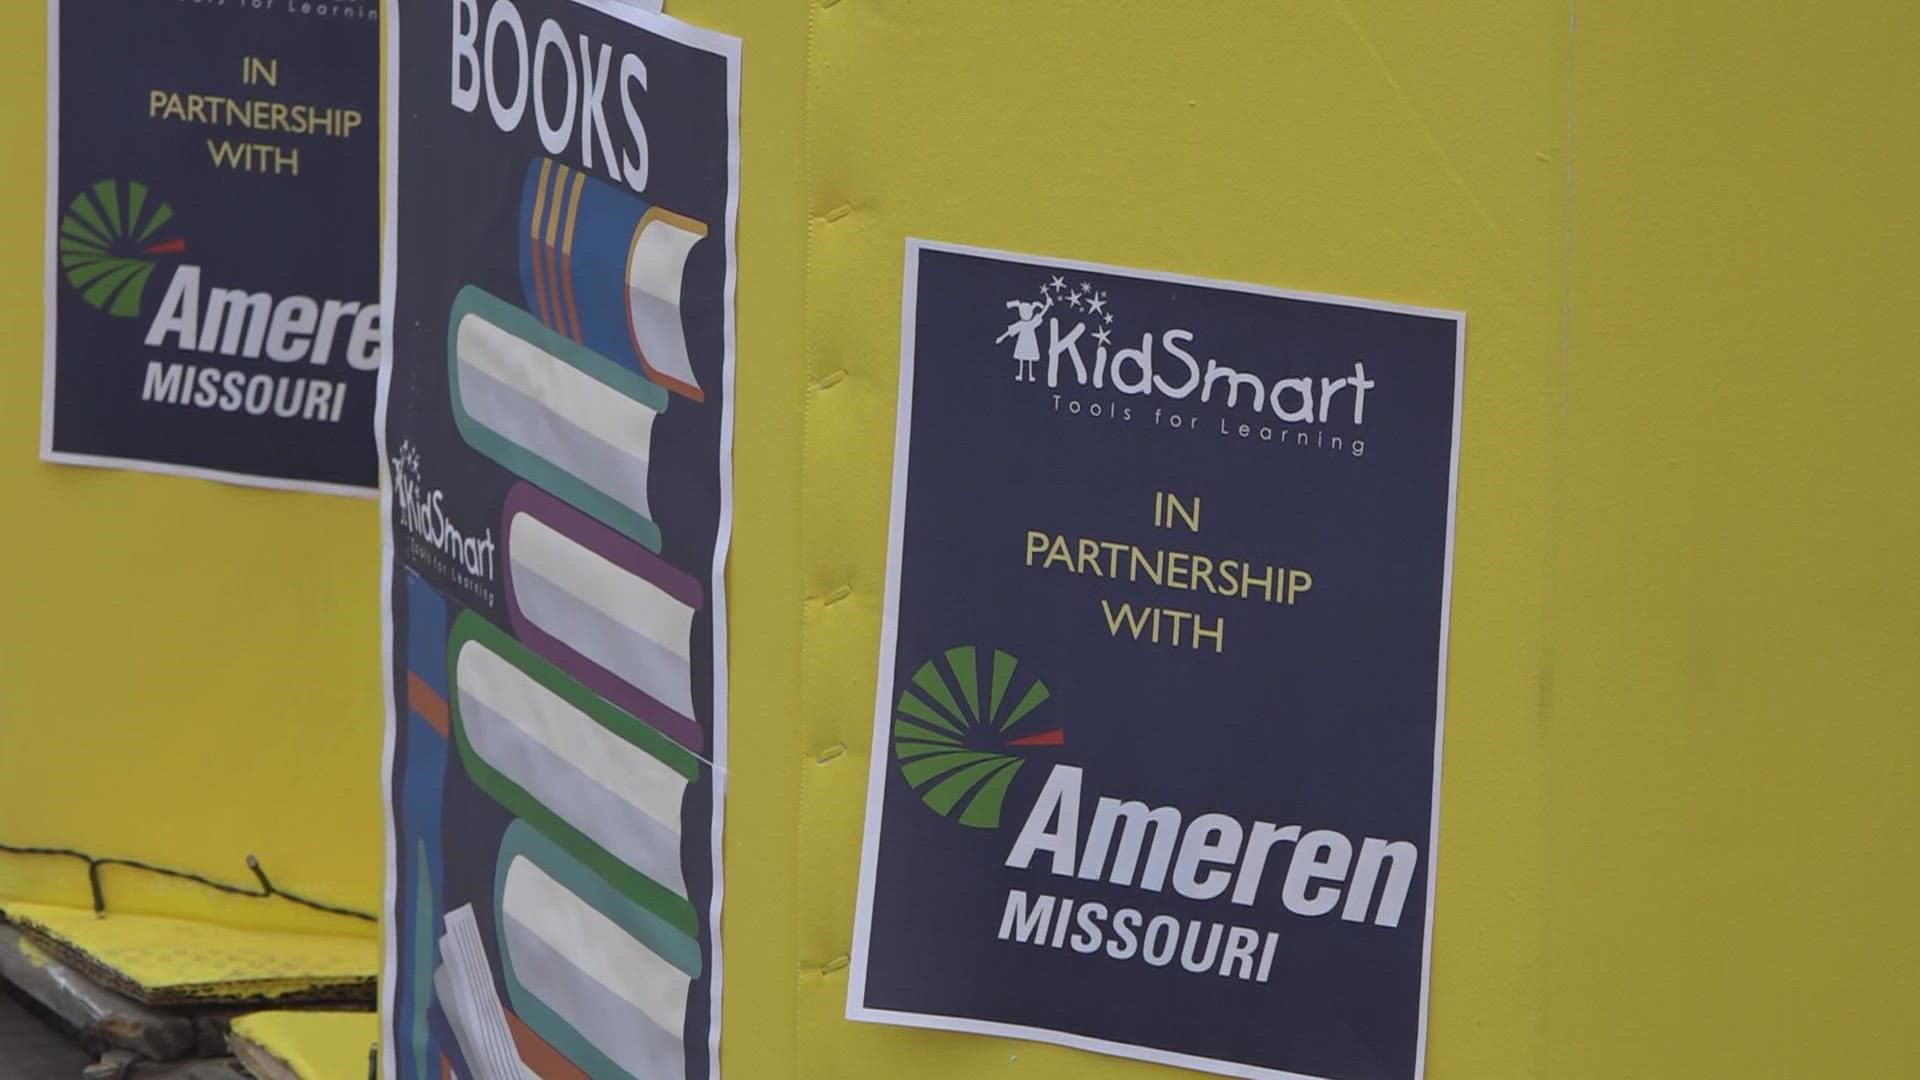 More than 300 local teachers received free school supplies to help their students. KidSmart kicked off its "Light Up Learning Season" to kick off "Giving Tuesday."